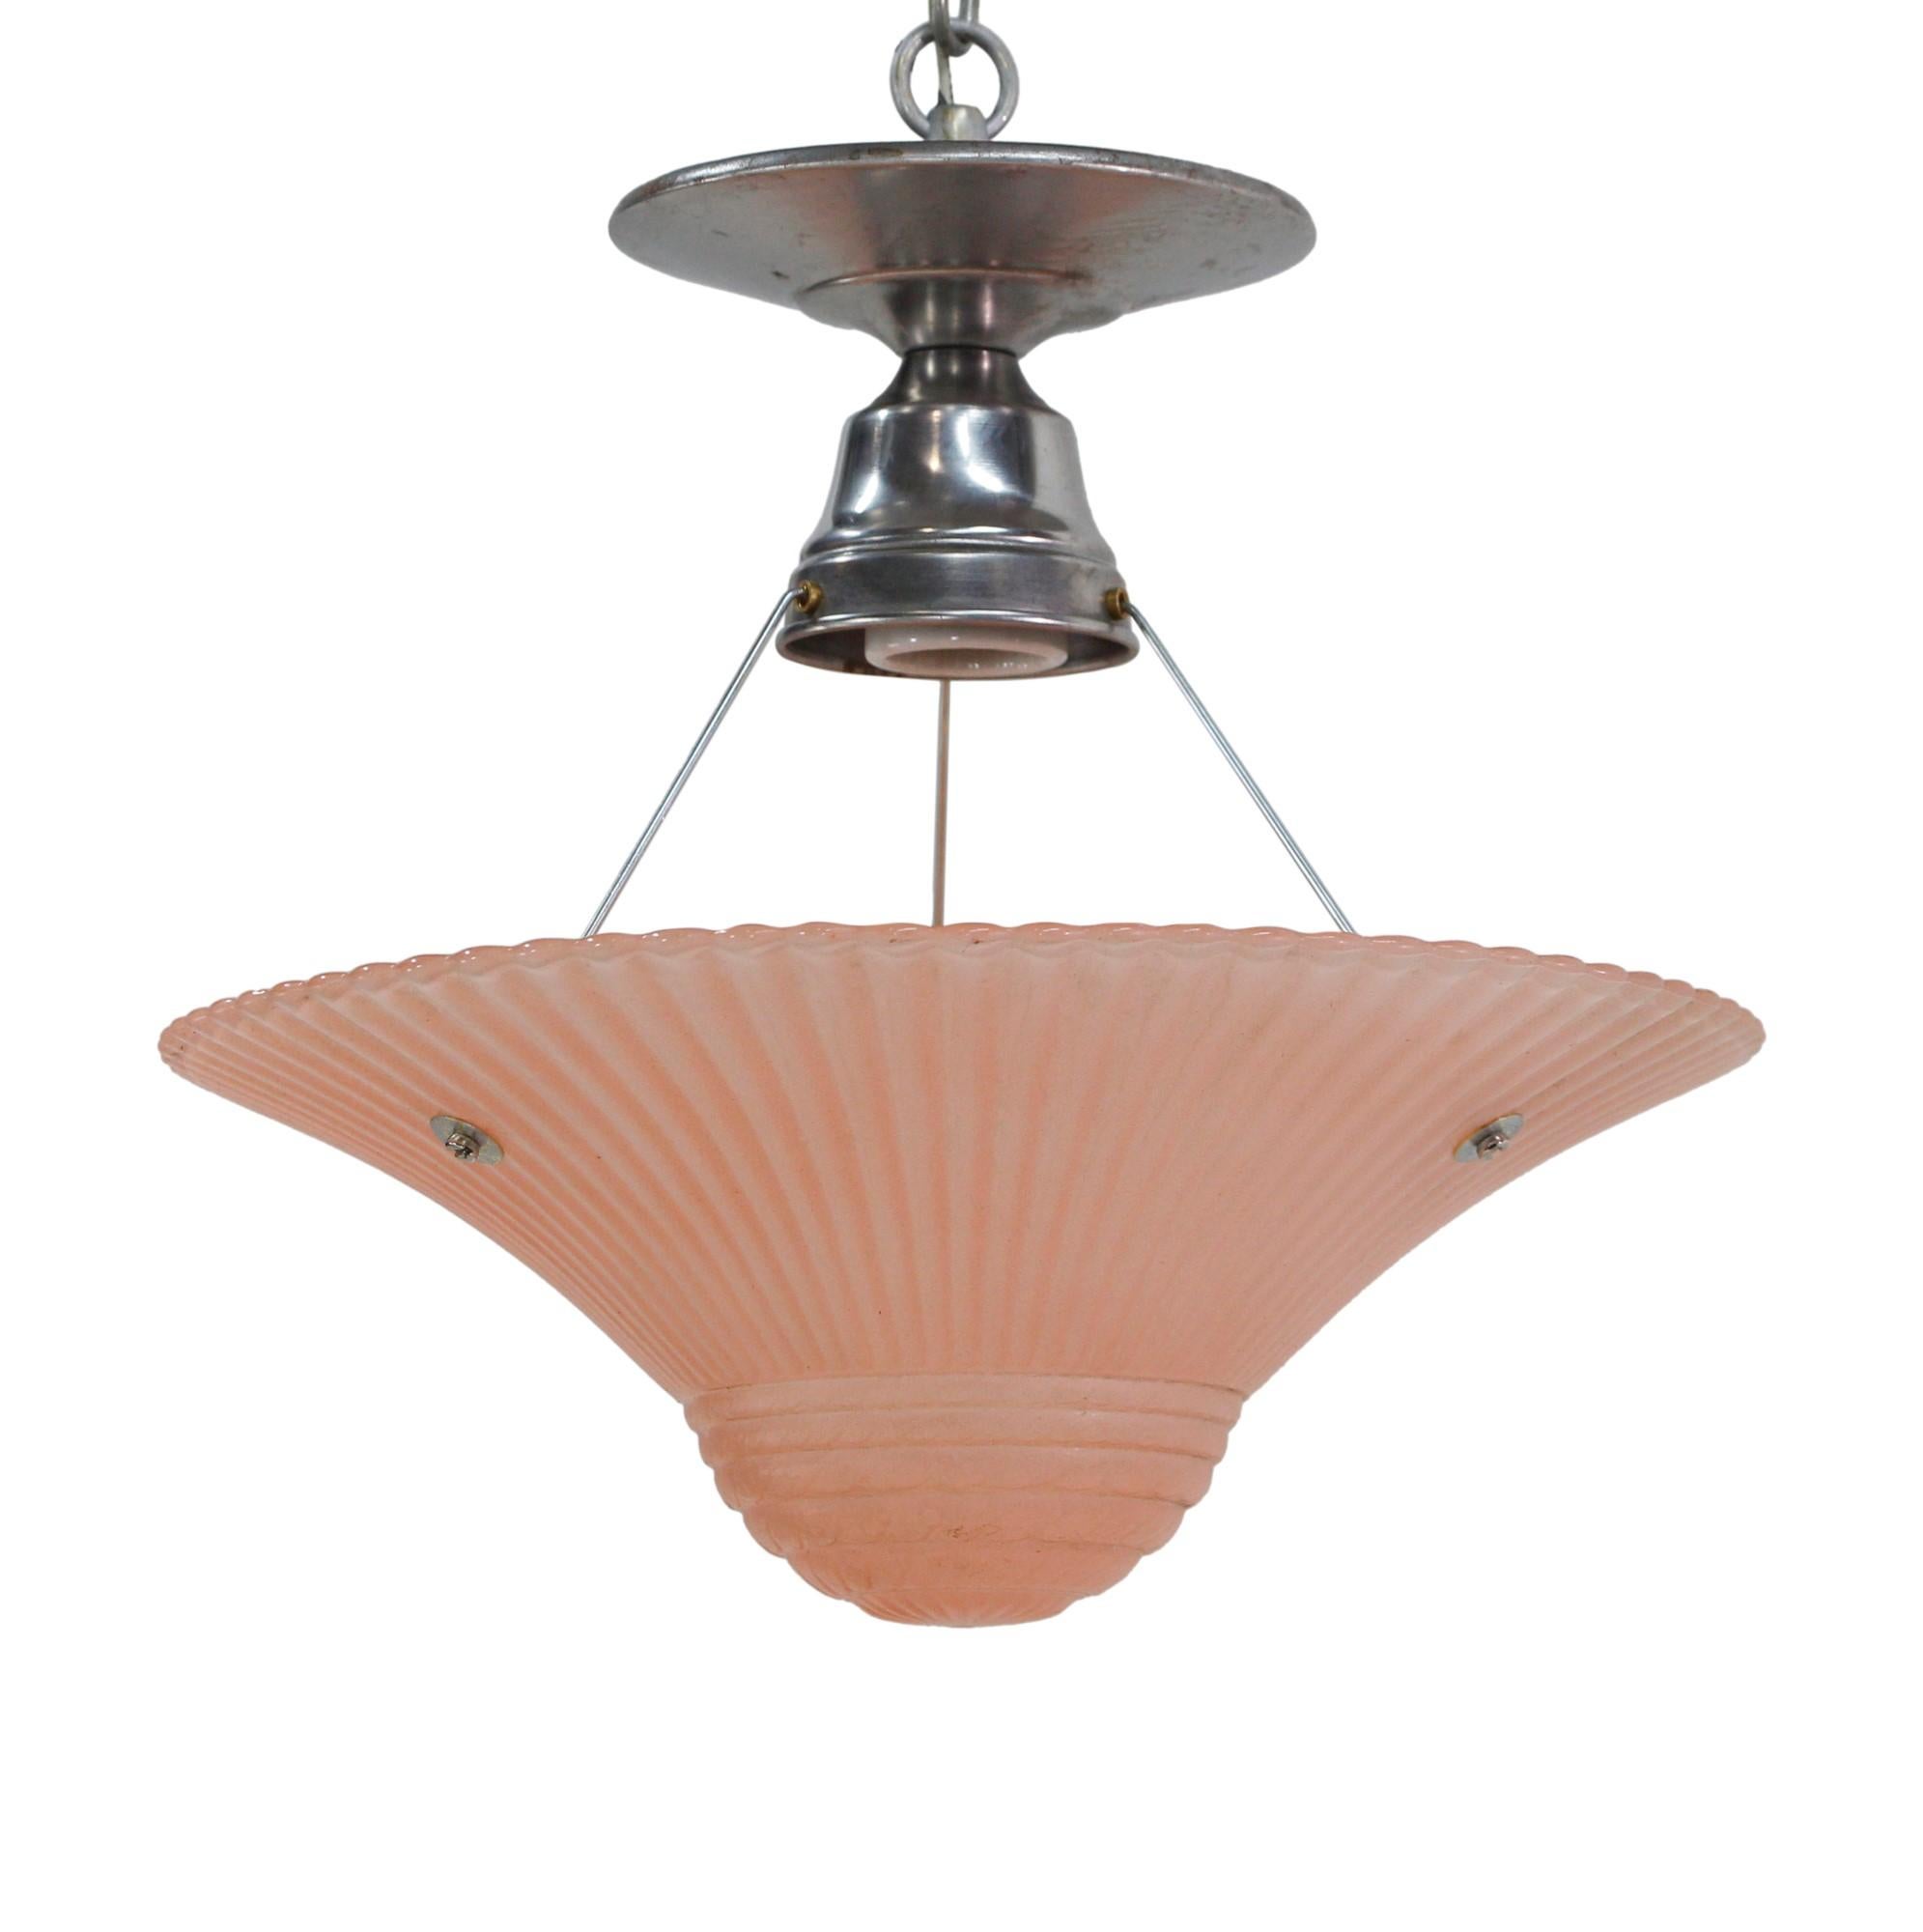 Art Deco flared pink glass dome shade with chrome flush mount base.  The chrome fitter has one porcelain socket with three polls supporting the shade. Price includes restoration. This can be seen at our 400 Gilligan St location in Scranton, PA.